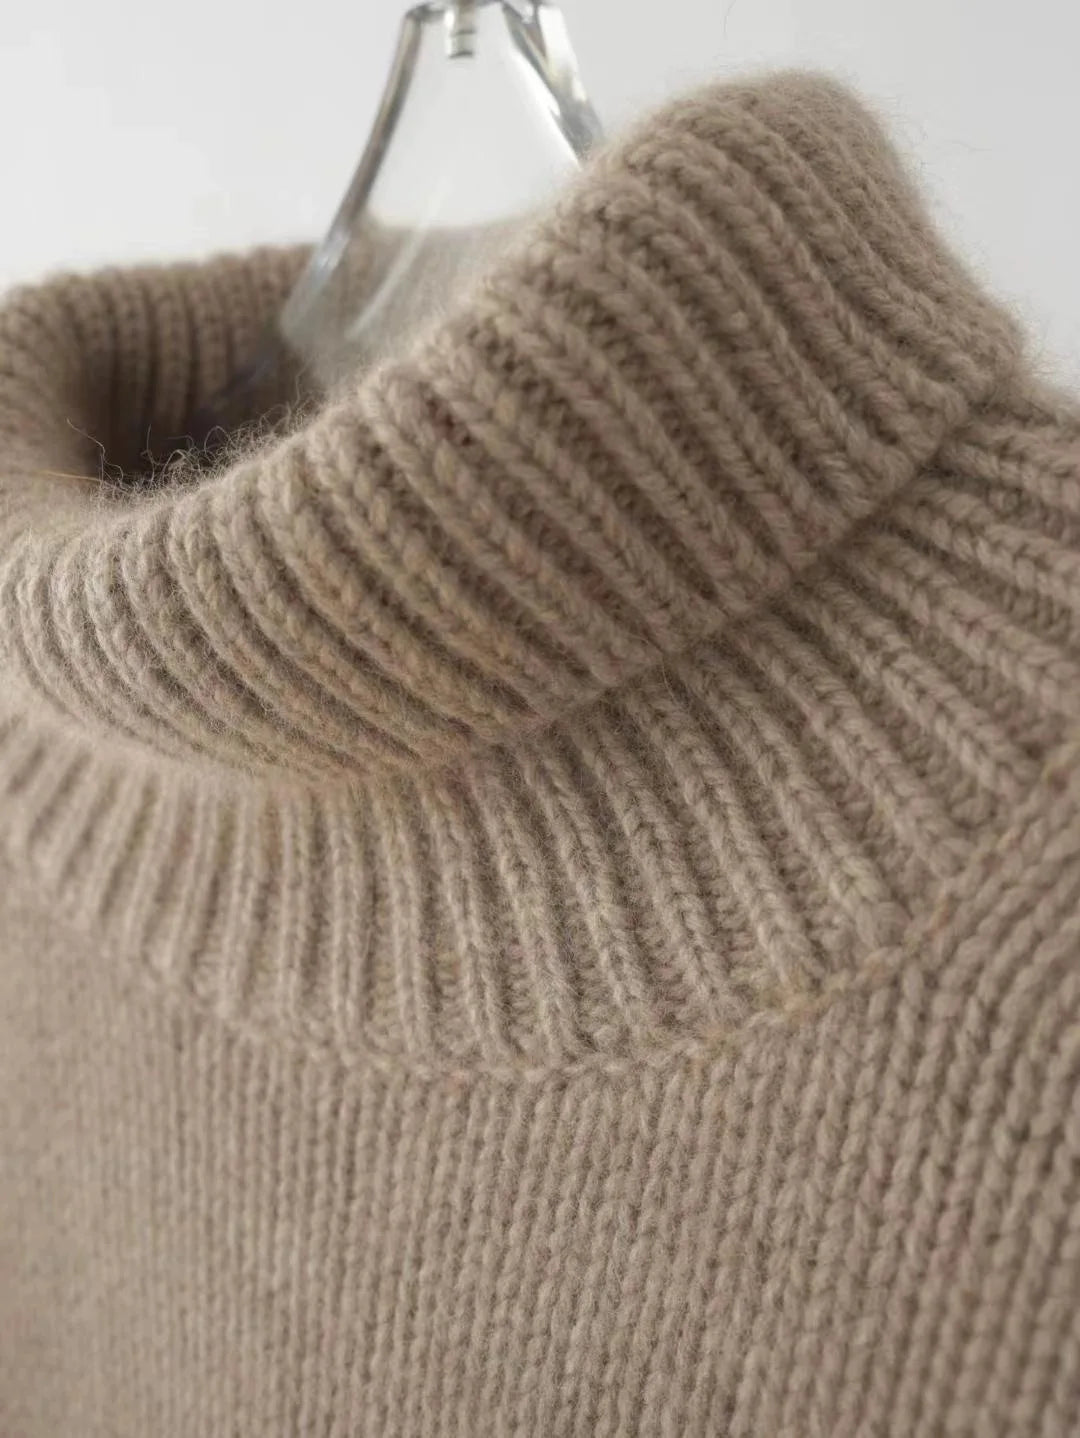 Relaxed Fit Merino Wool Knit Turtleneck